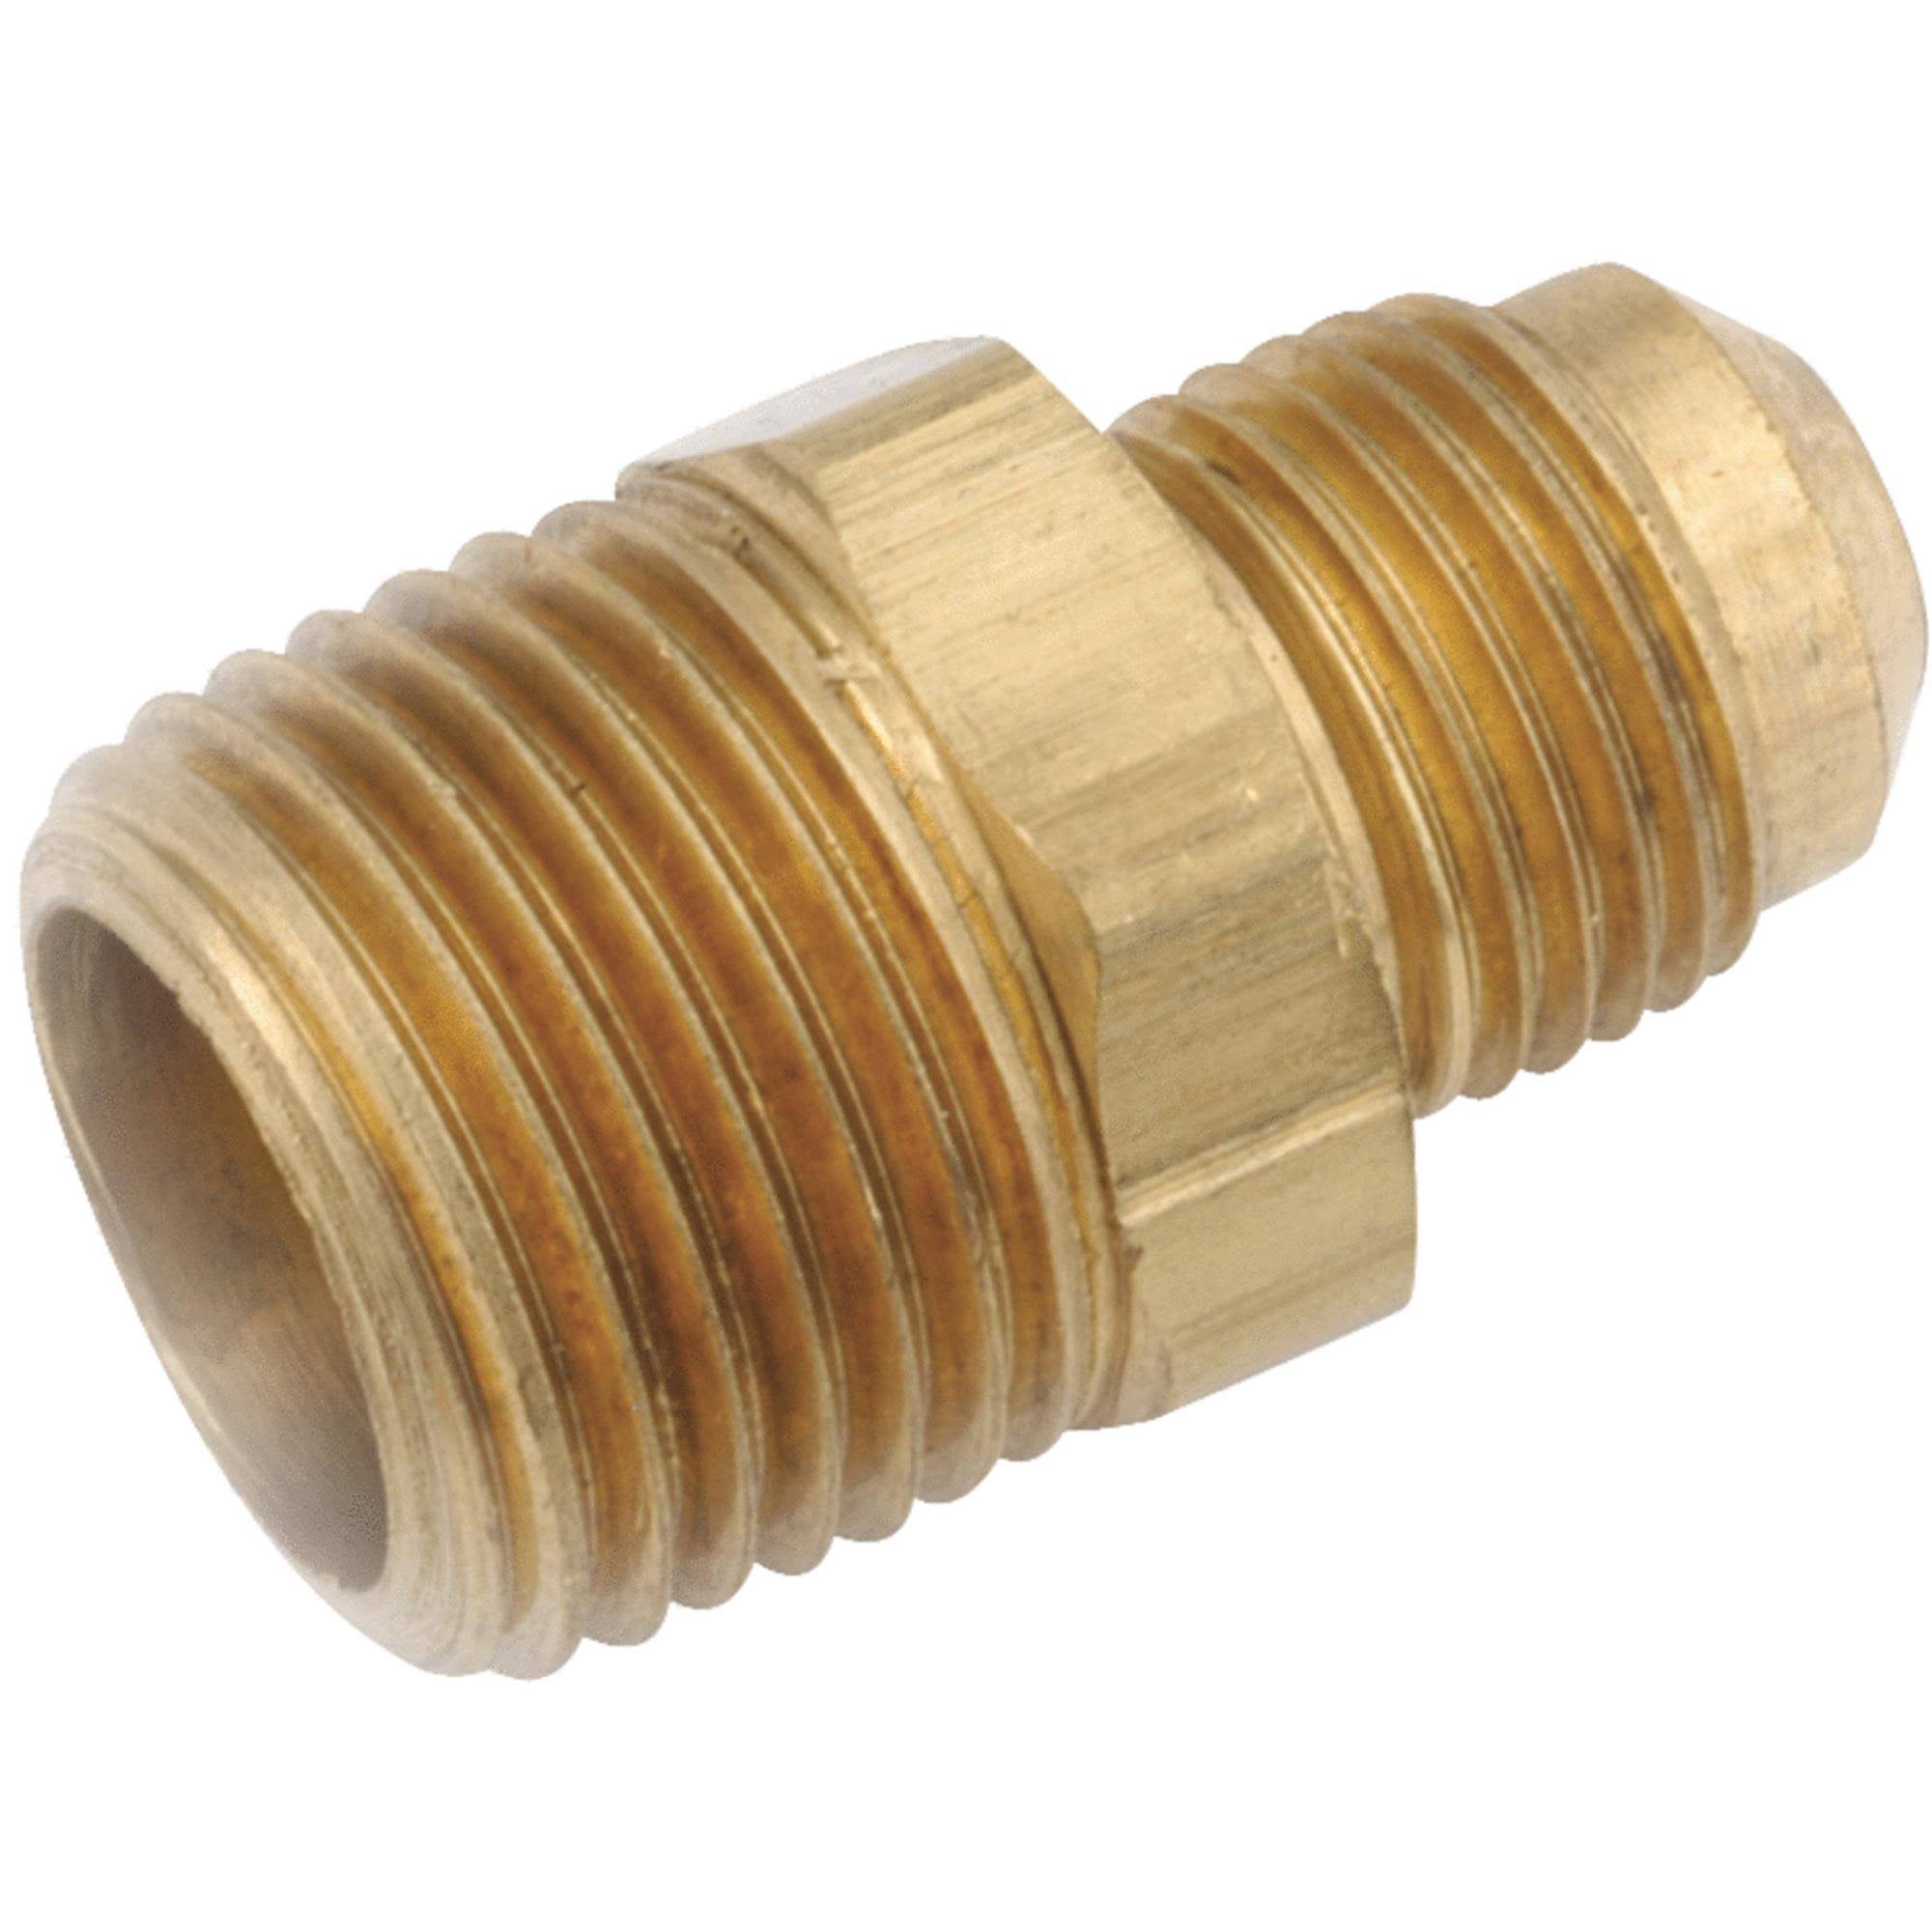 Anderson Metals 7540481012 Male Pipe Thread Connector - 5/8" x 3/4", Brass